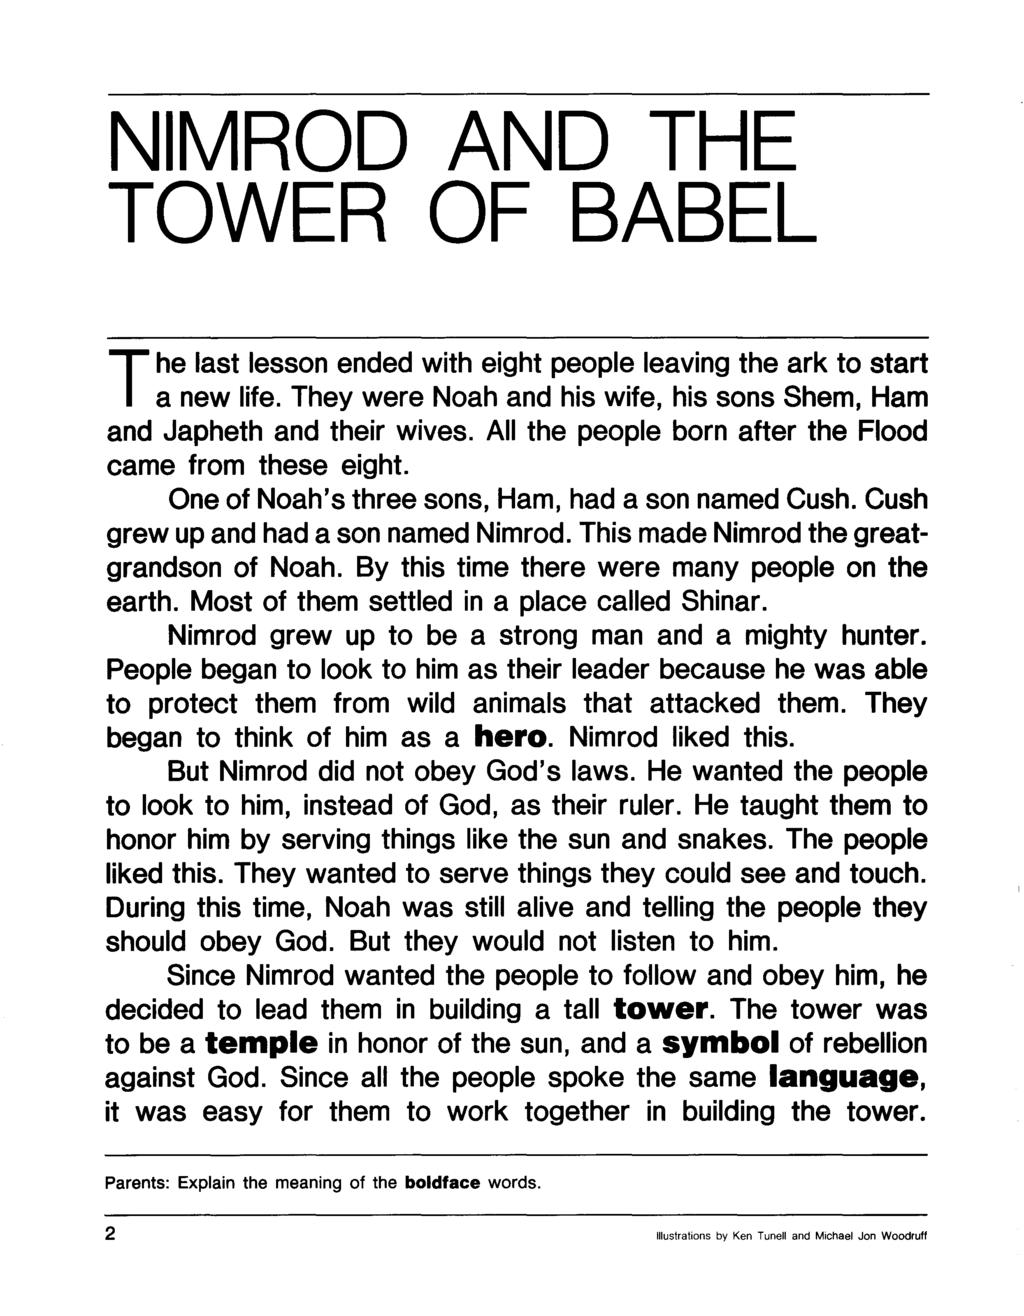 NIMROD AND THE TOWER OF BABEL The last lesson ended with eight people leaving the ark to start a new life. They were Noah and his wife, his sons Shem, Ham and Japheth and their wives.